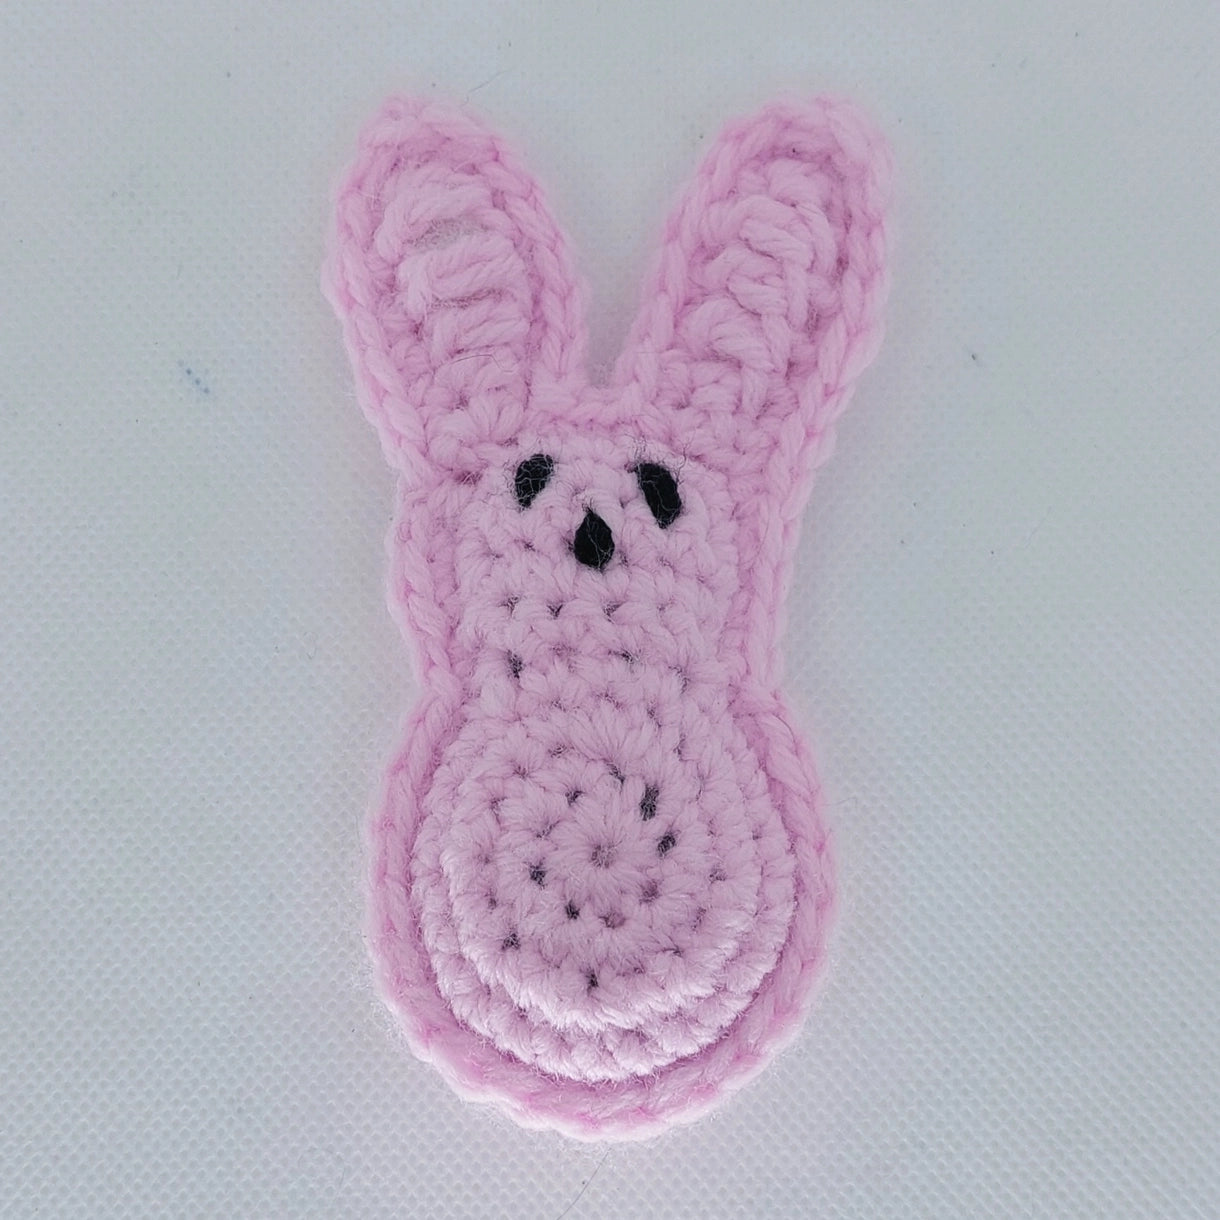 Easter Bunny Peeps Catnip Toy - Made To Order